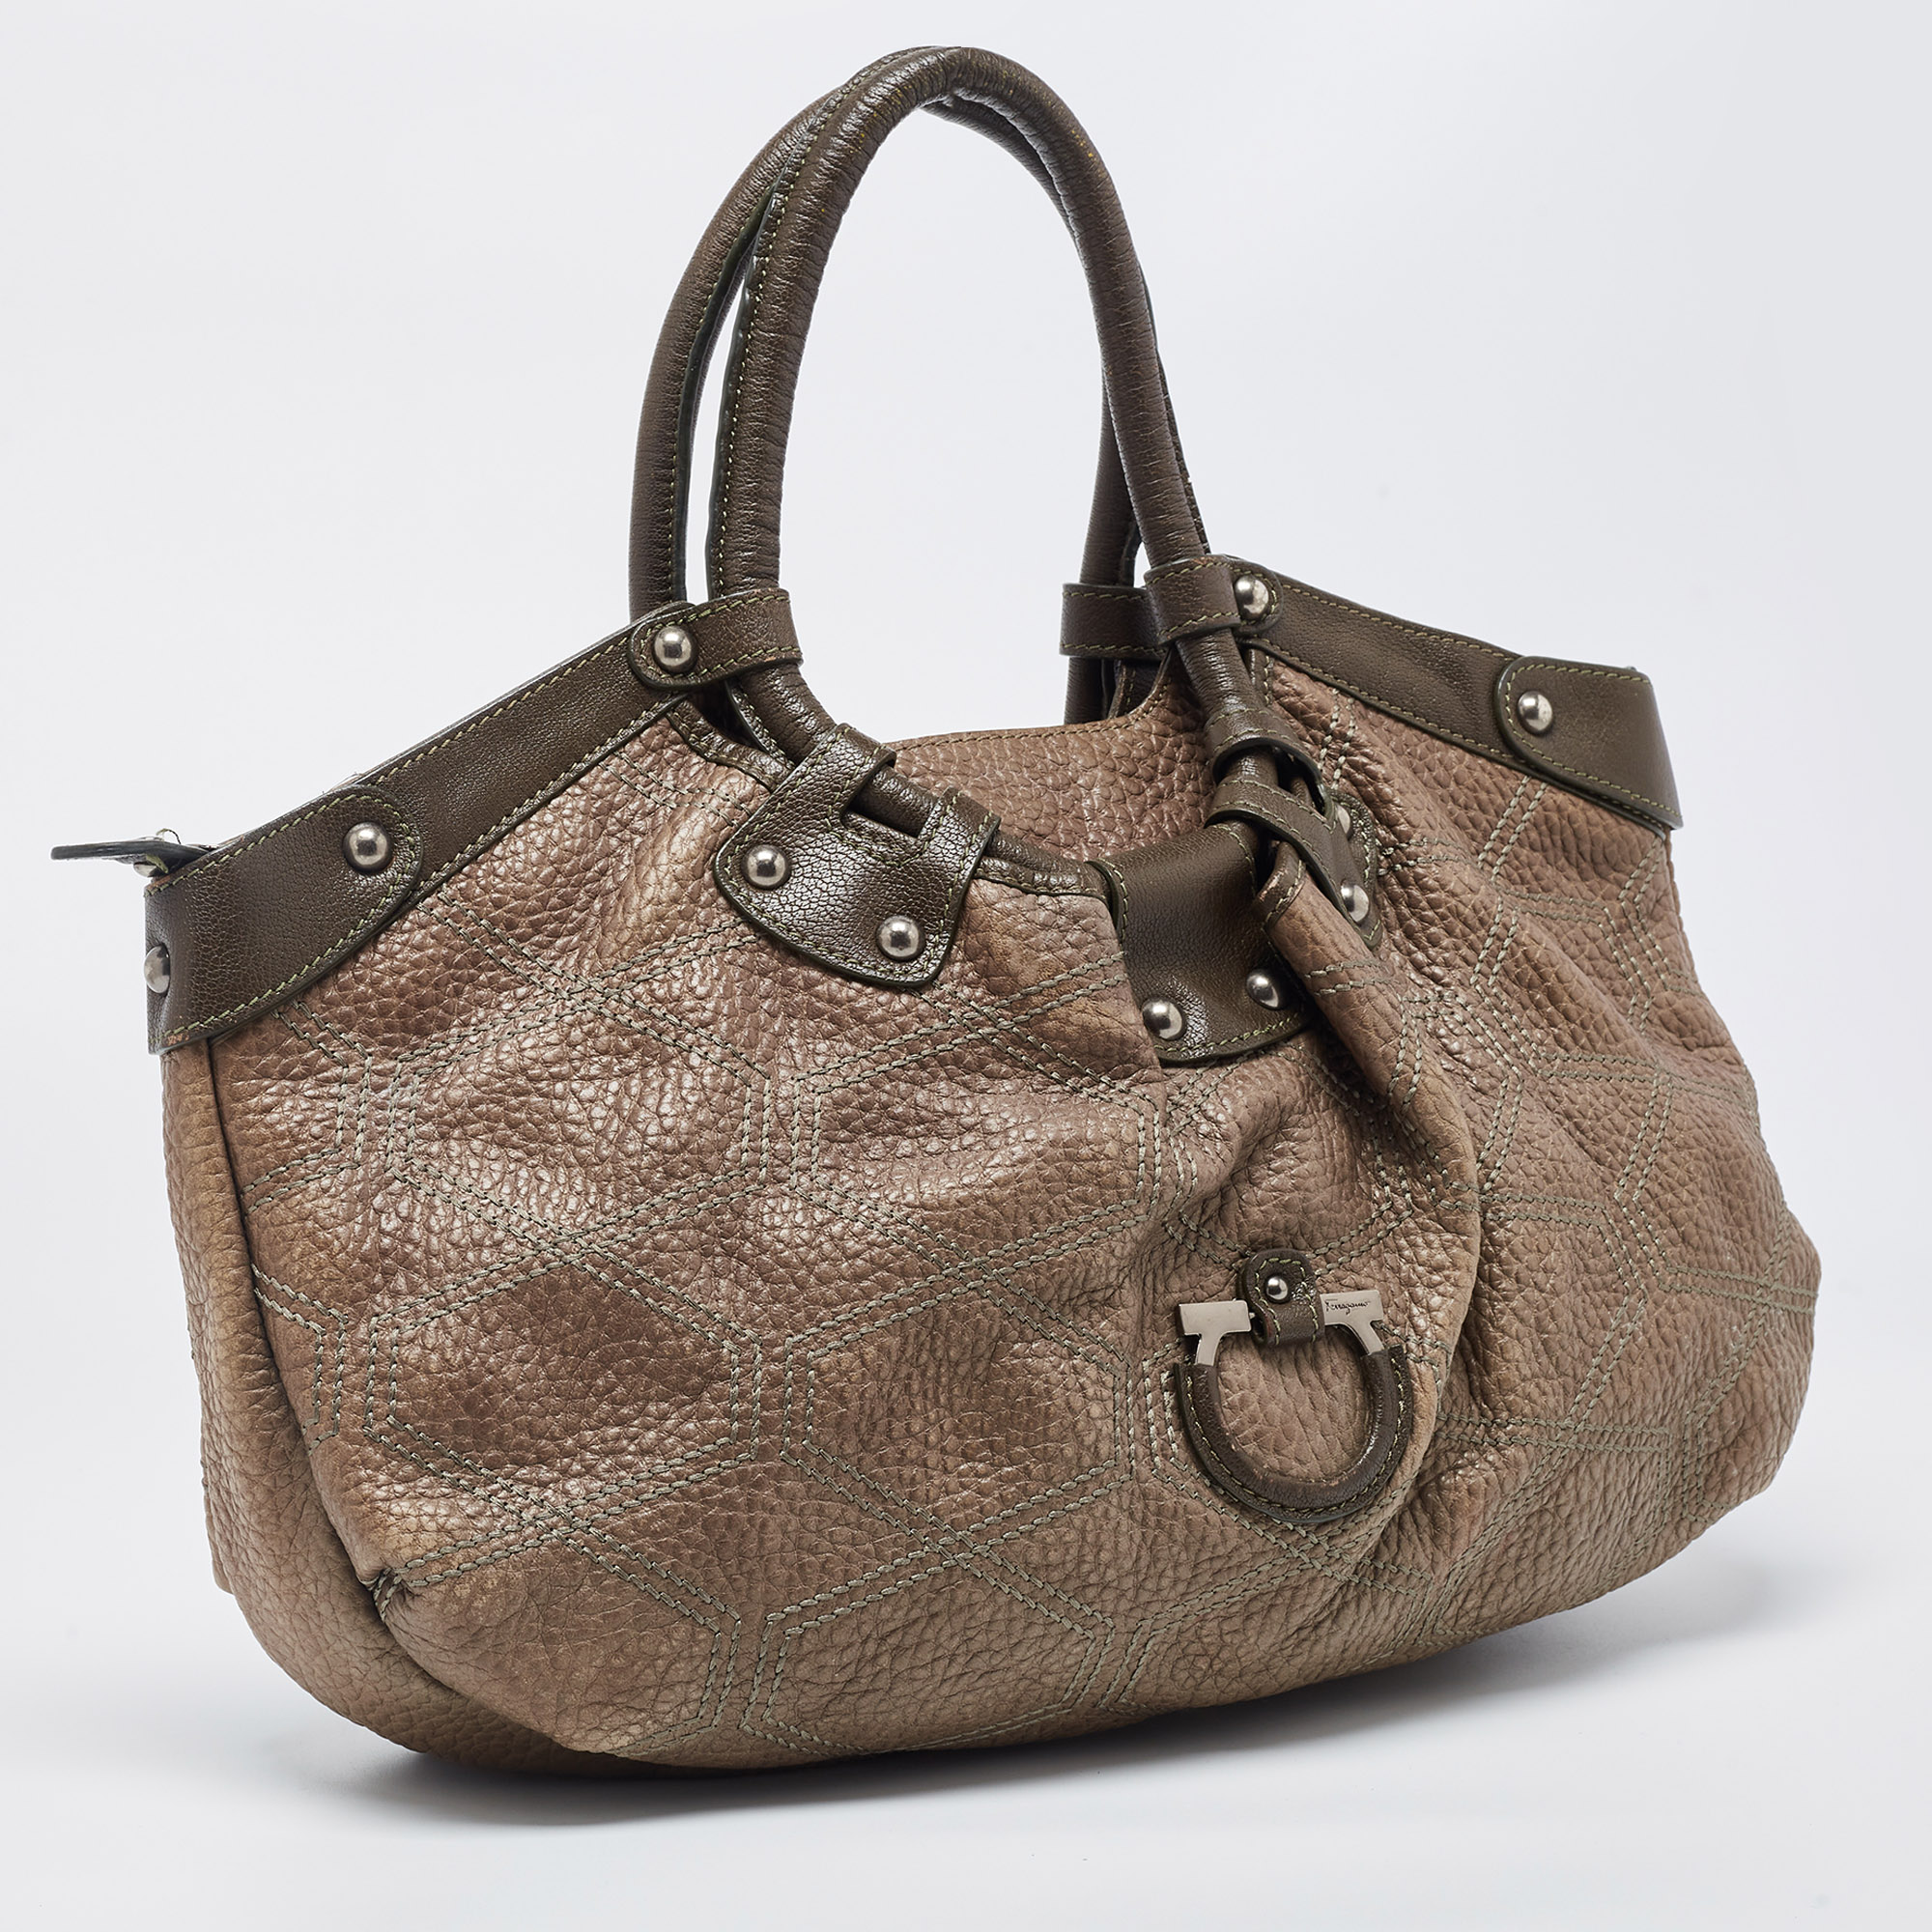 Salvatore Ferragamo Olive Green Quilted Leather Gancini Hobo